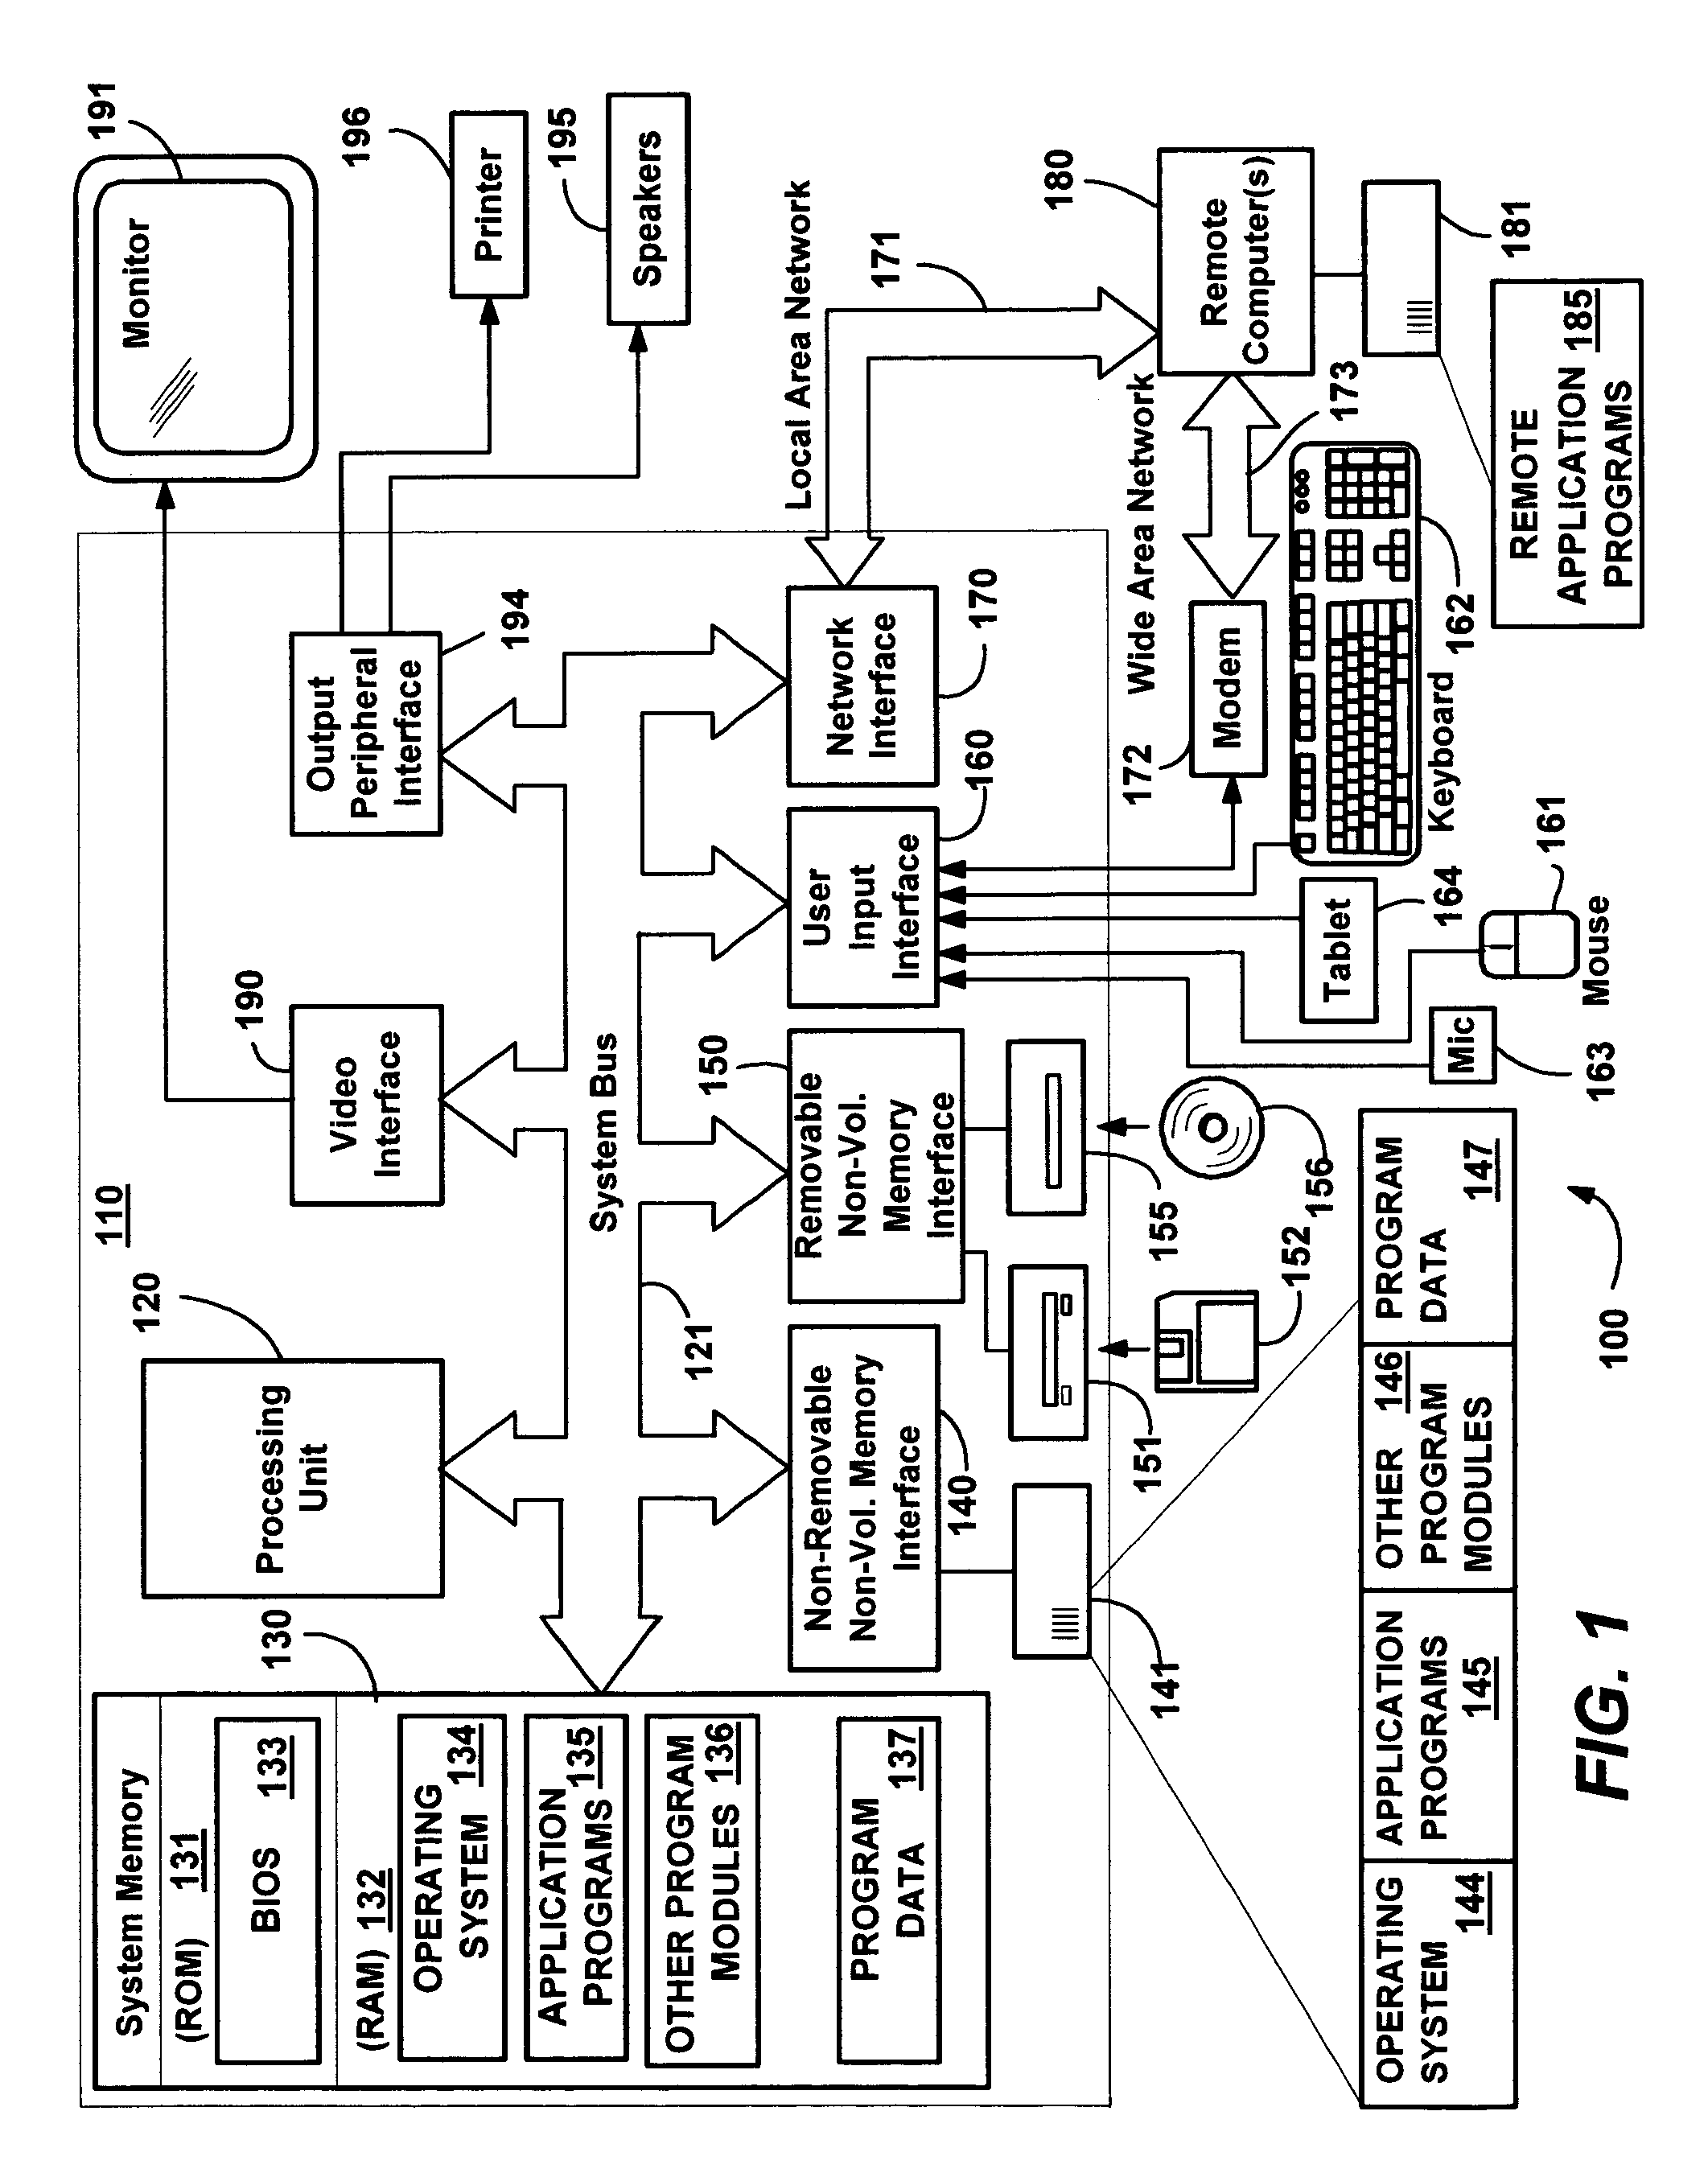 Method and system of previewing a volume revert operation